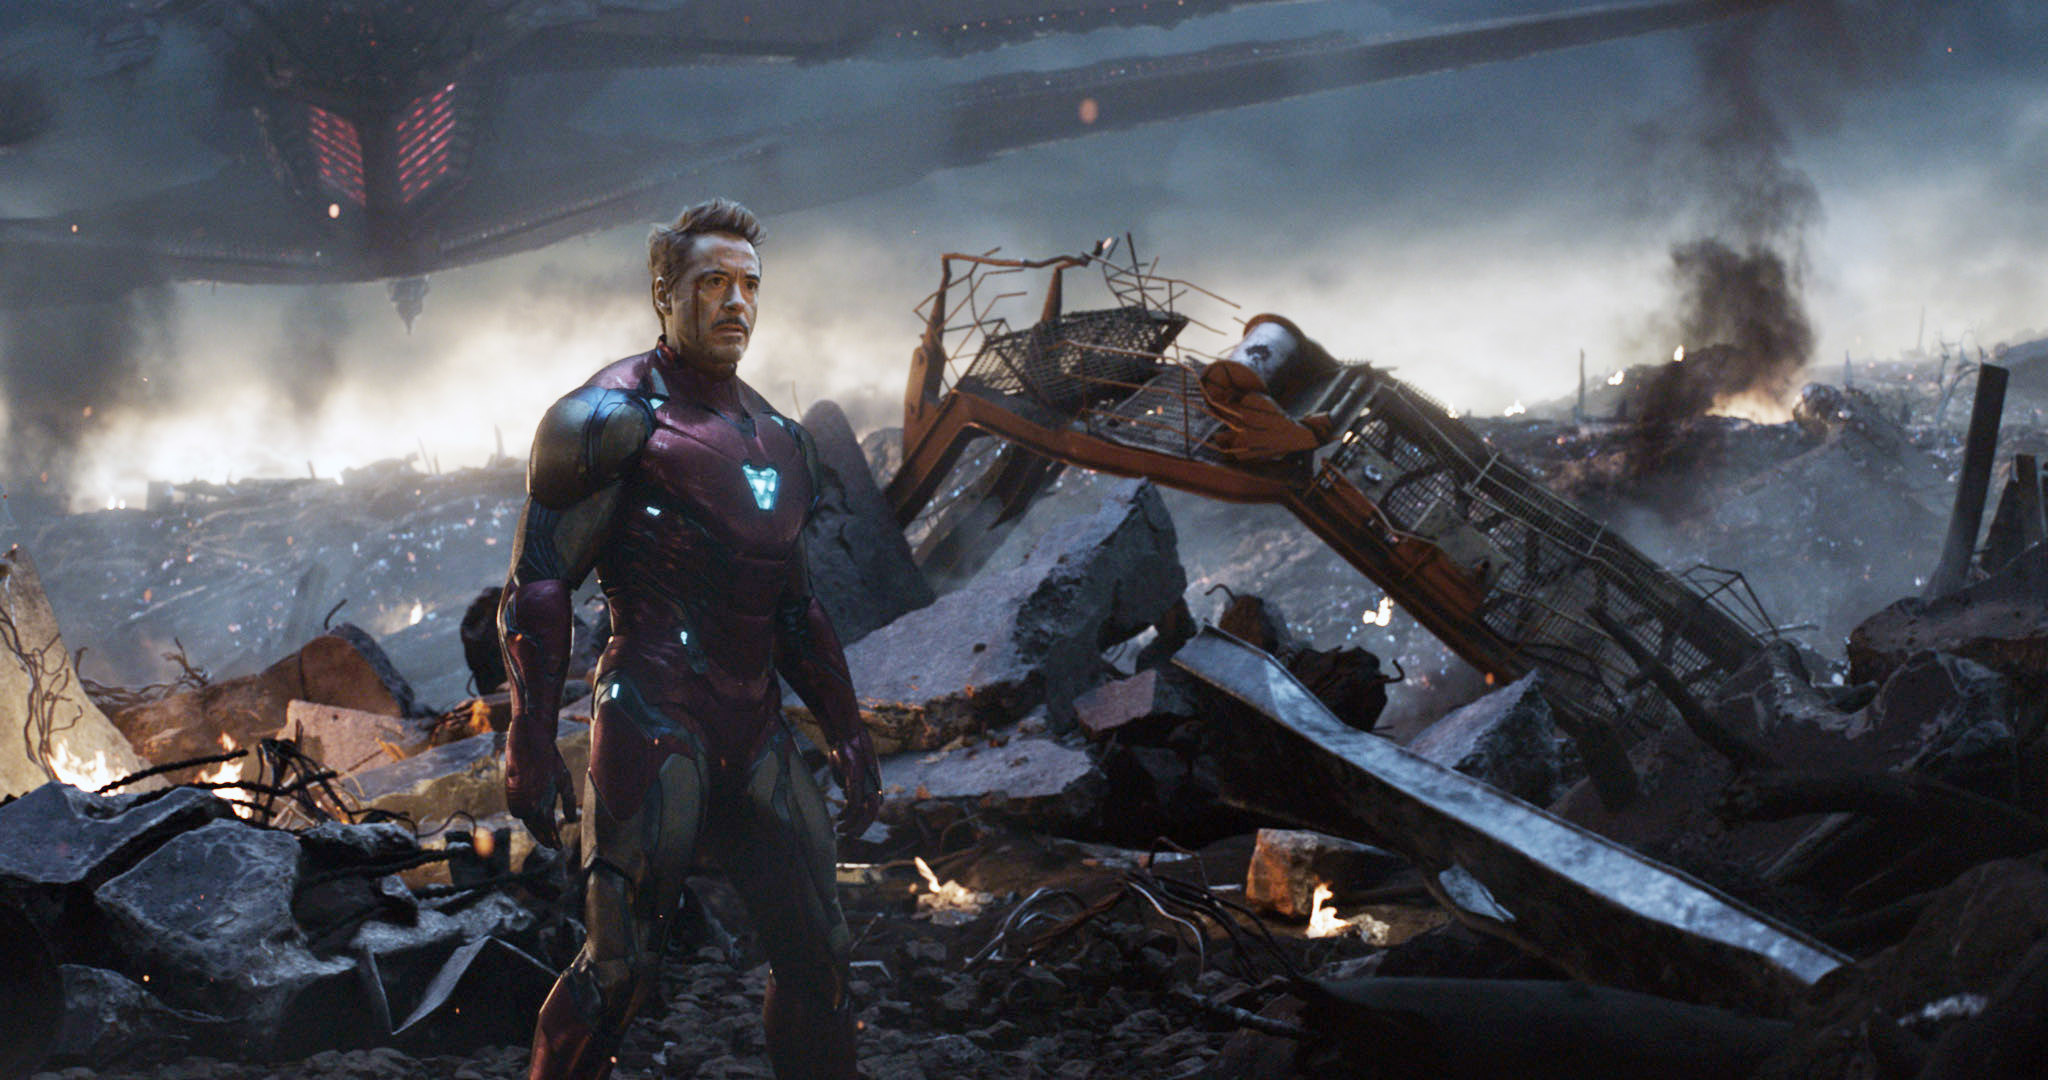 Tony Stark standing in the debris of the fight in &quot;Avengers: Endgame&quot;